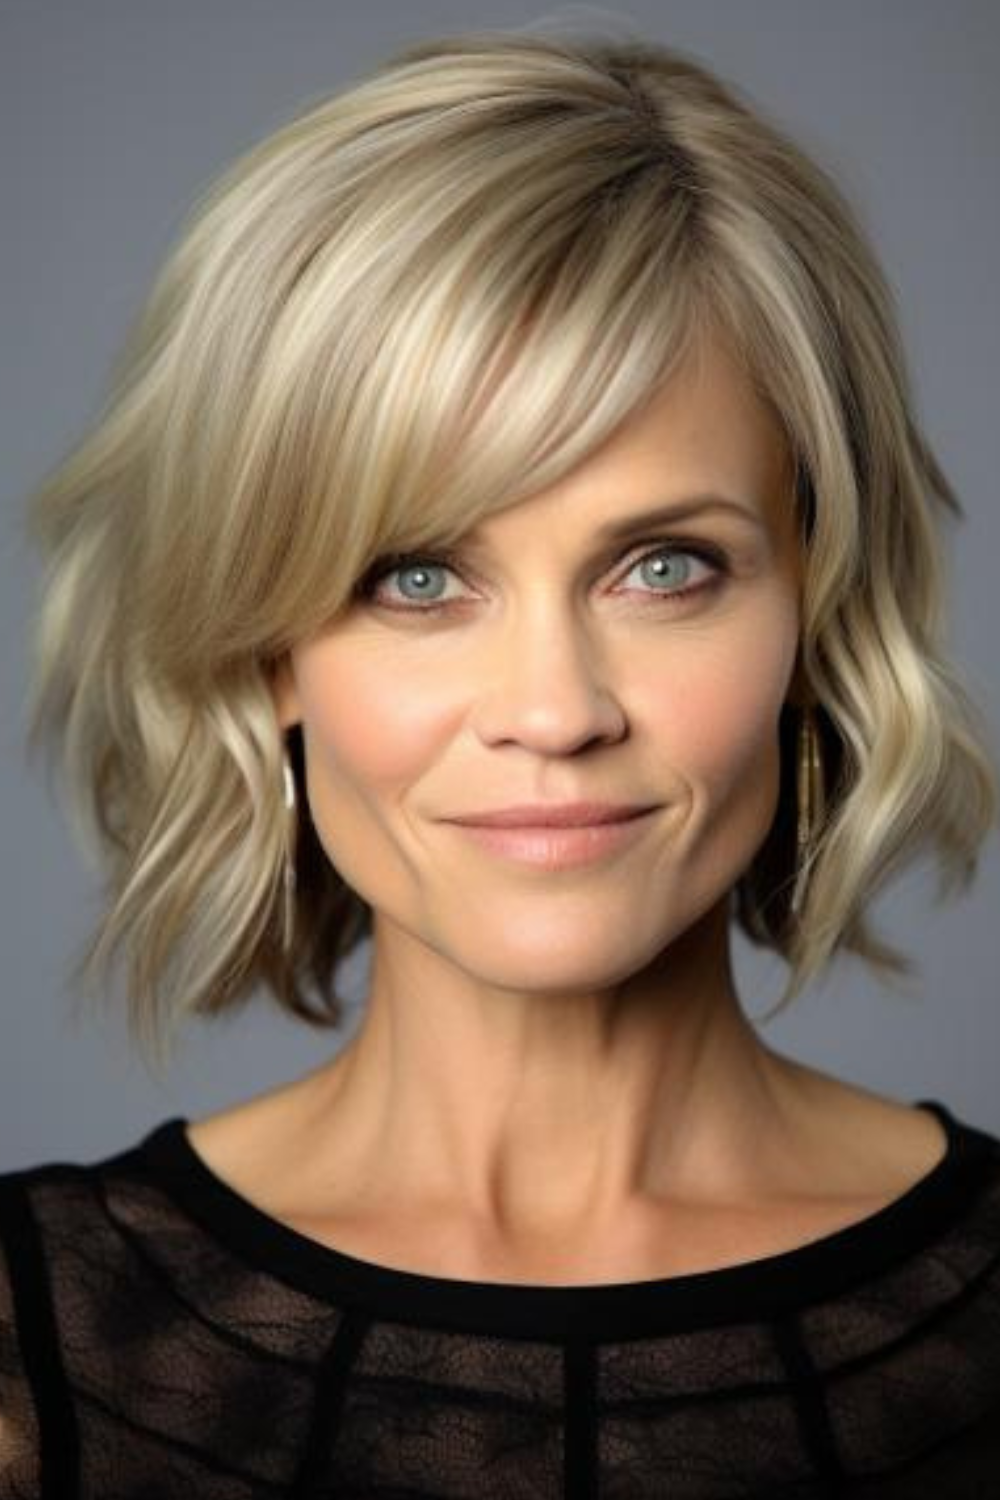 Stylish Hairstyles to Add Volume and Texture to Fine Hair